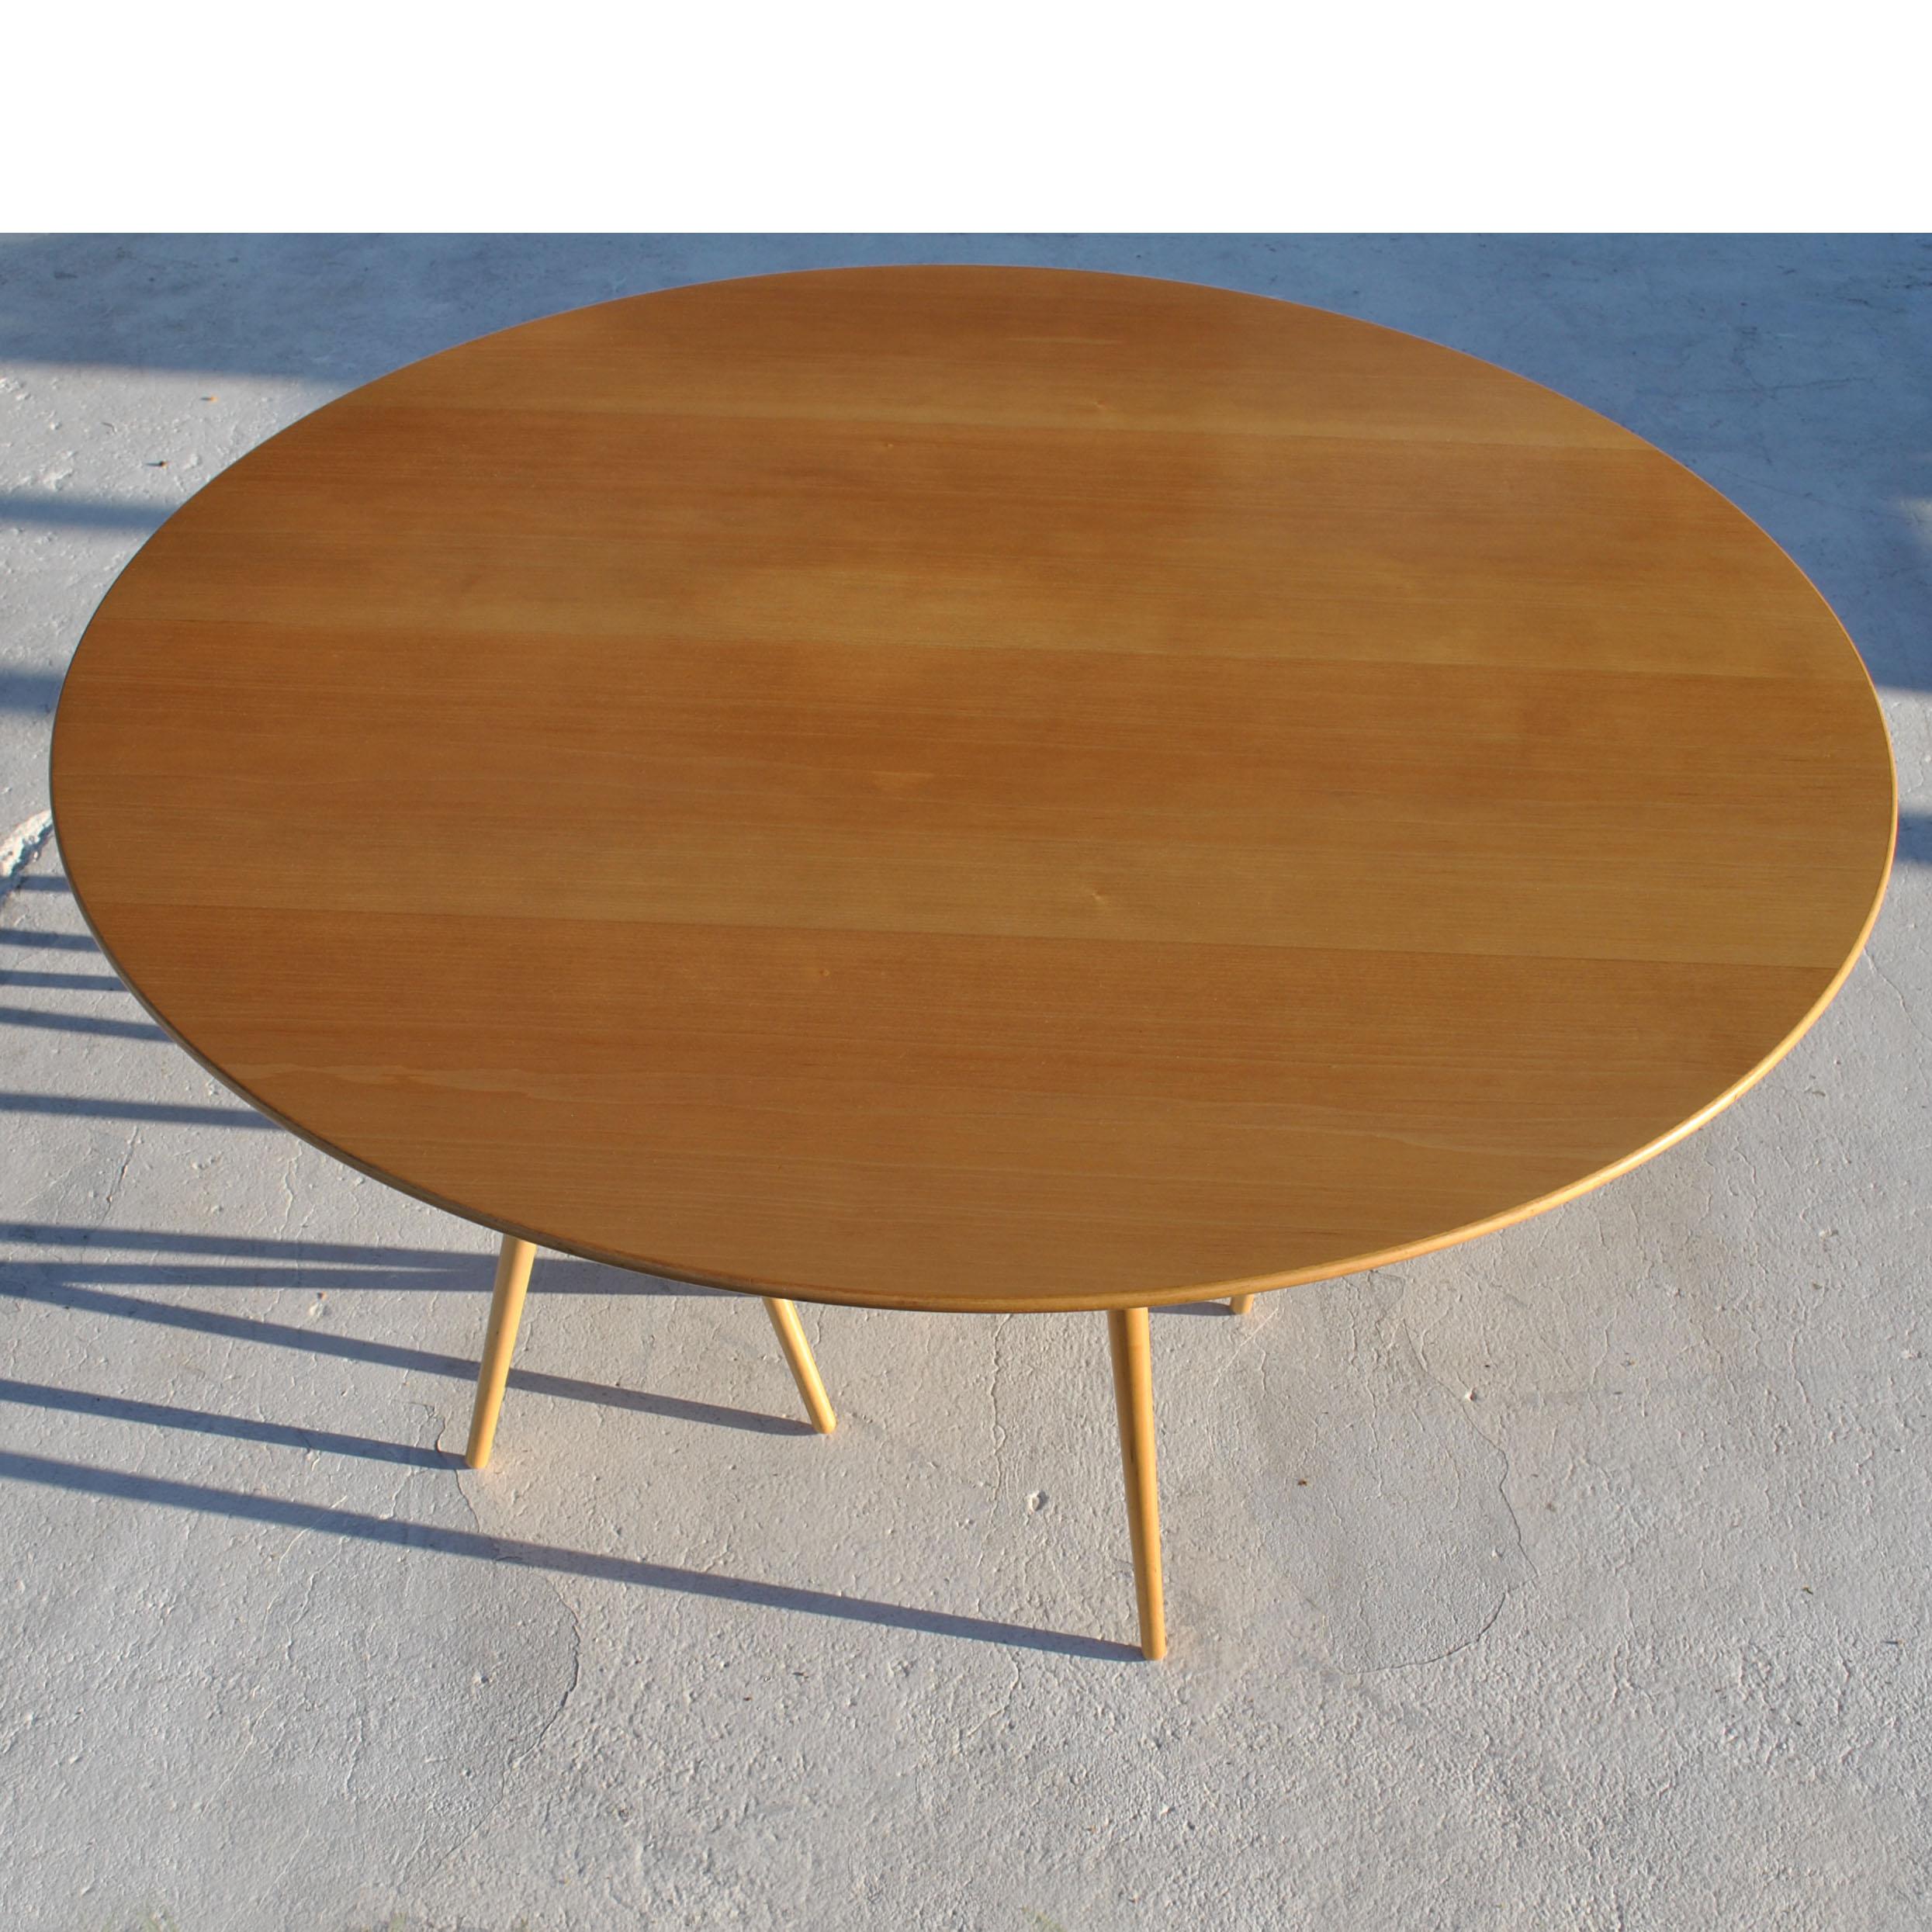 Modern Round Toothpick Cactus Table by Lawrence Laske for Knoll For Sale